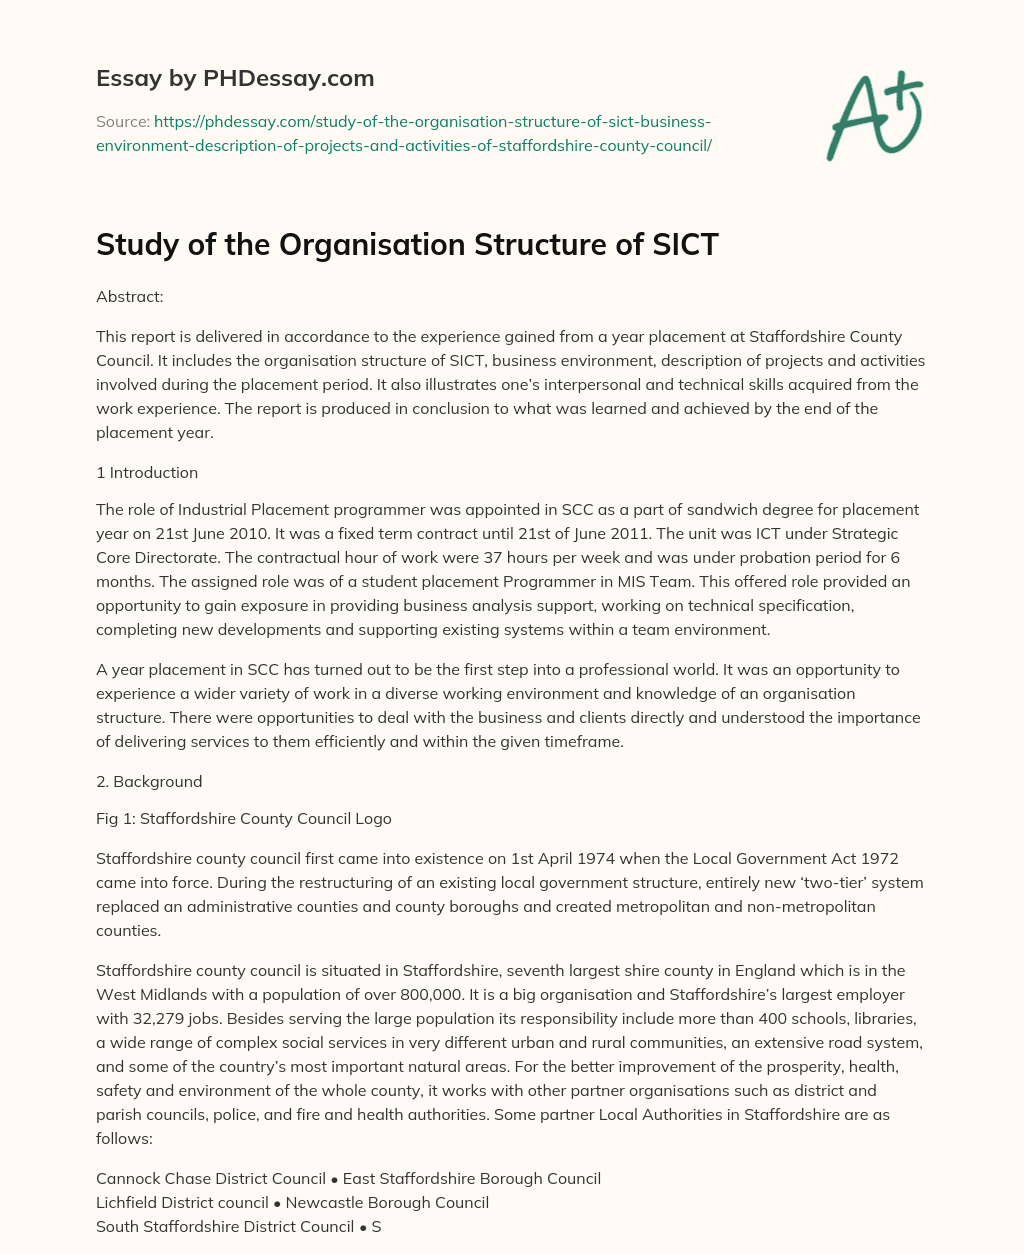 Study of the Organisation Structure of SICT essay